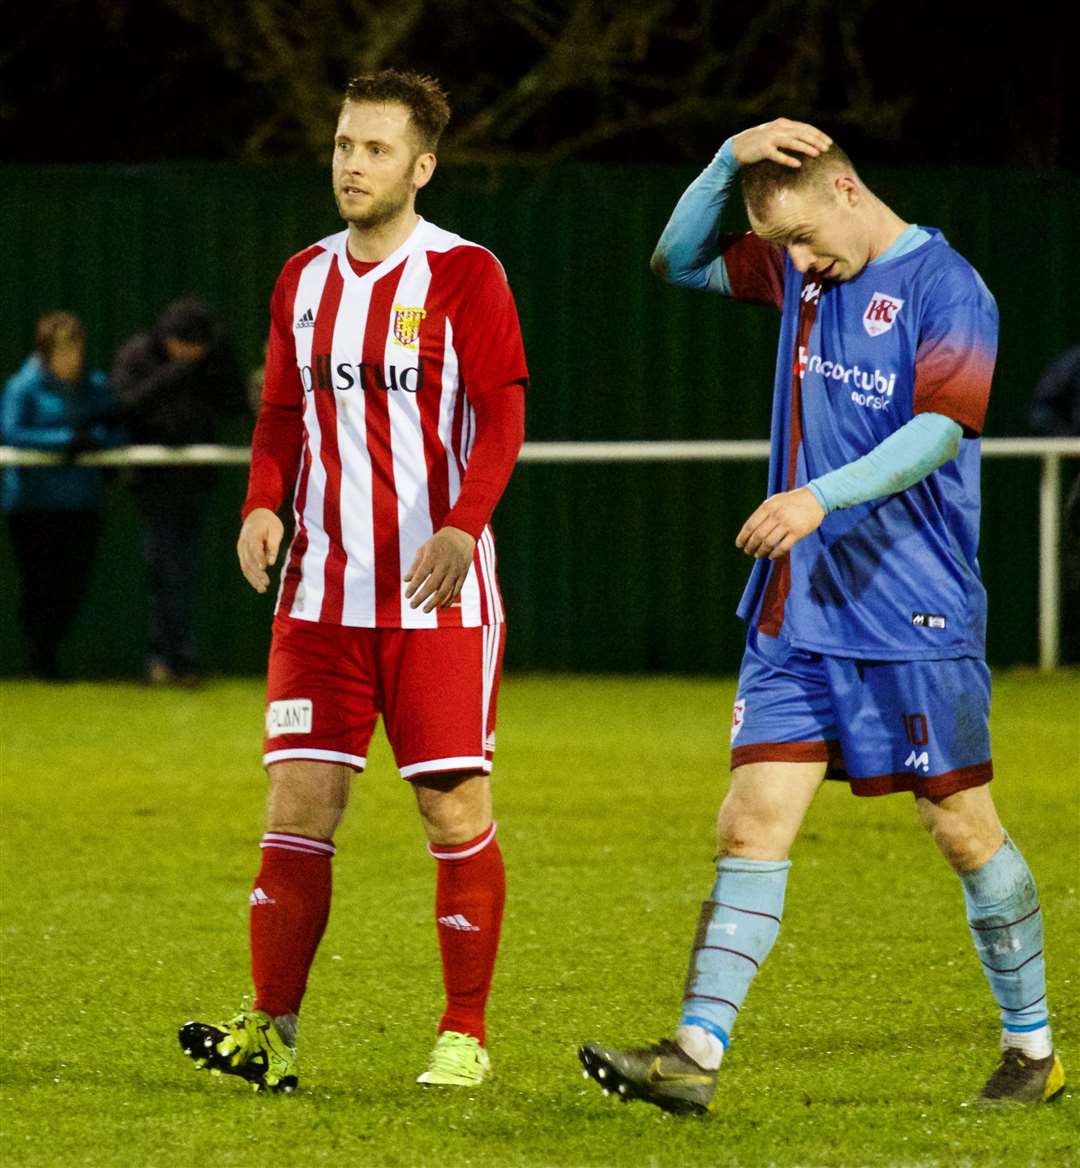 Formartine manager Paul Lawson thrust himself into the action. Picture: Phil Harman